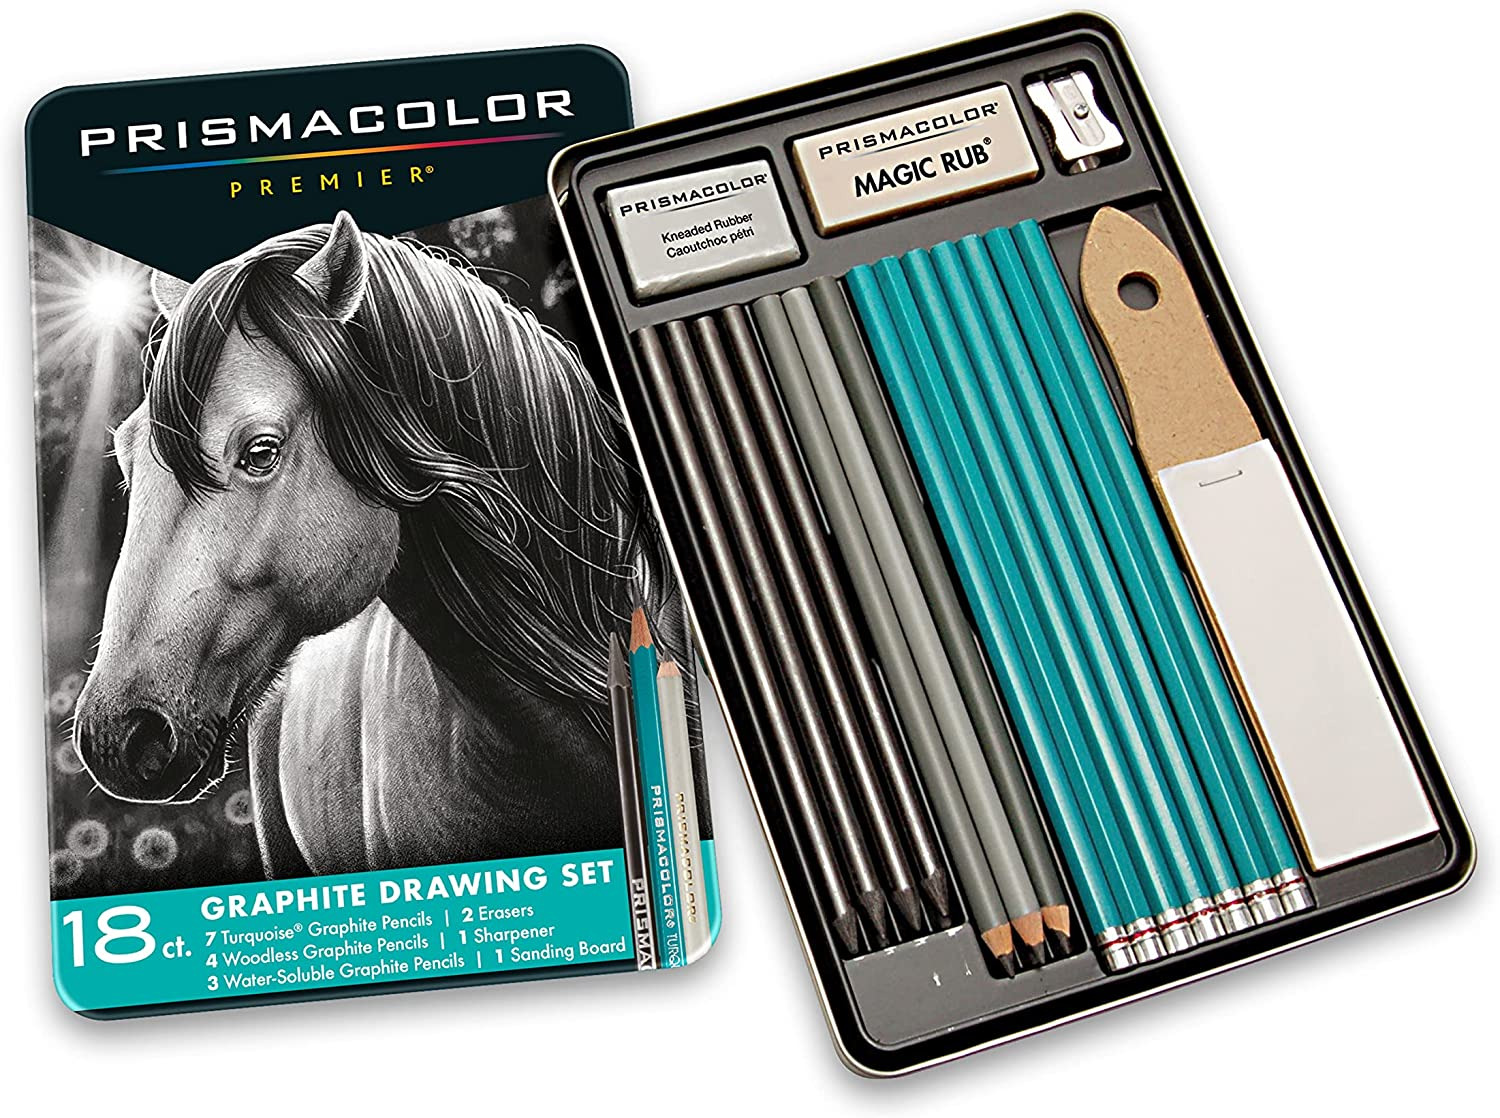 Prismacolor Premier Graphite Drawing Pencils with Erasers & Sharpeners, 18-Piece